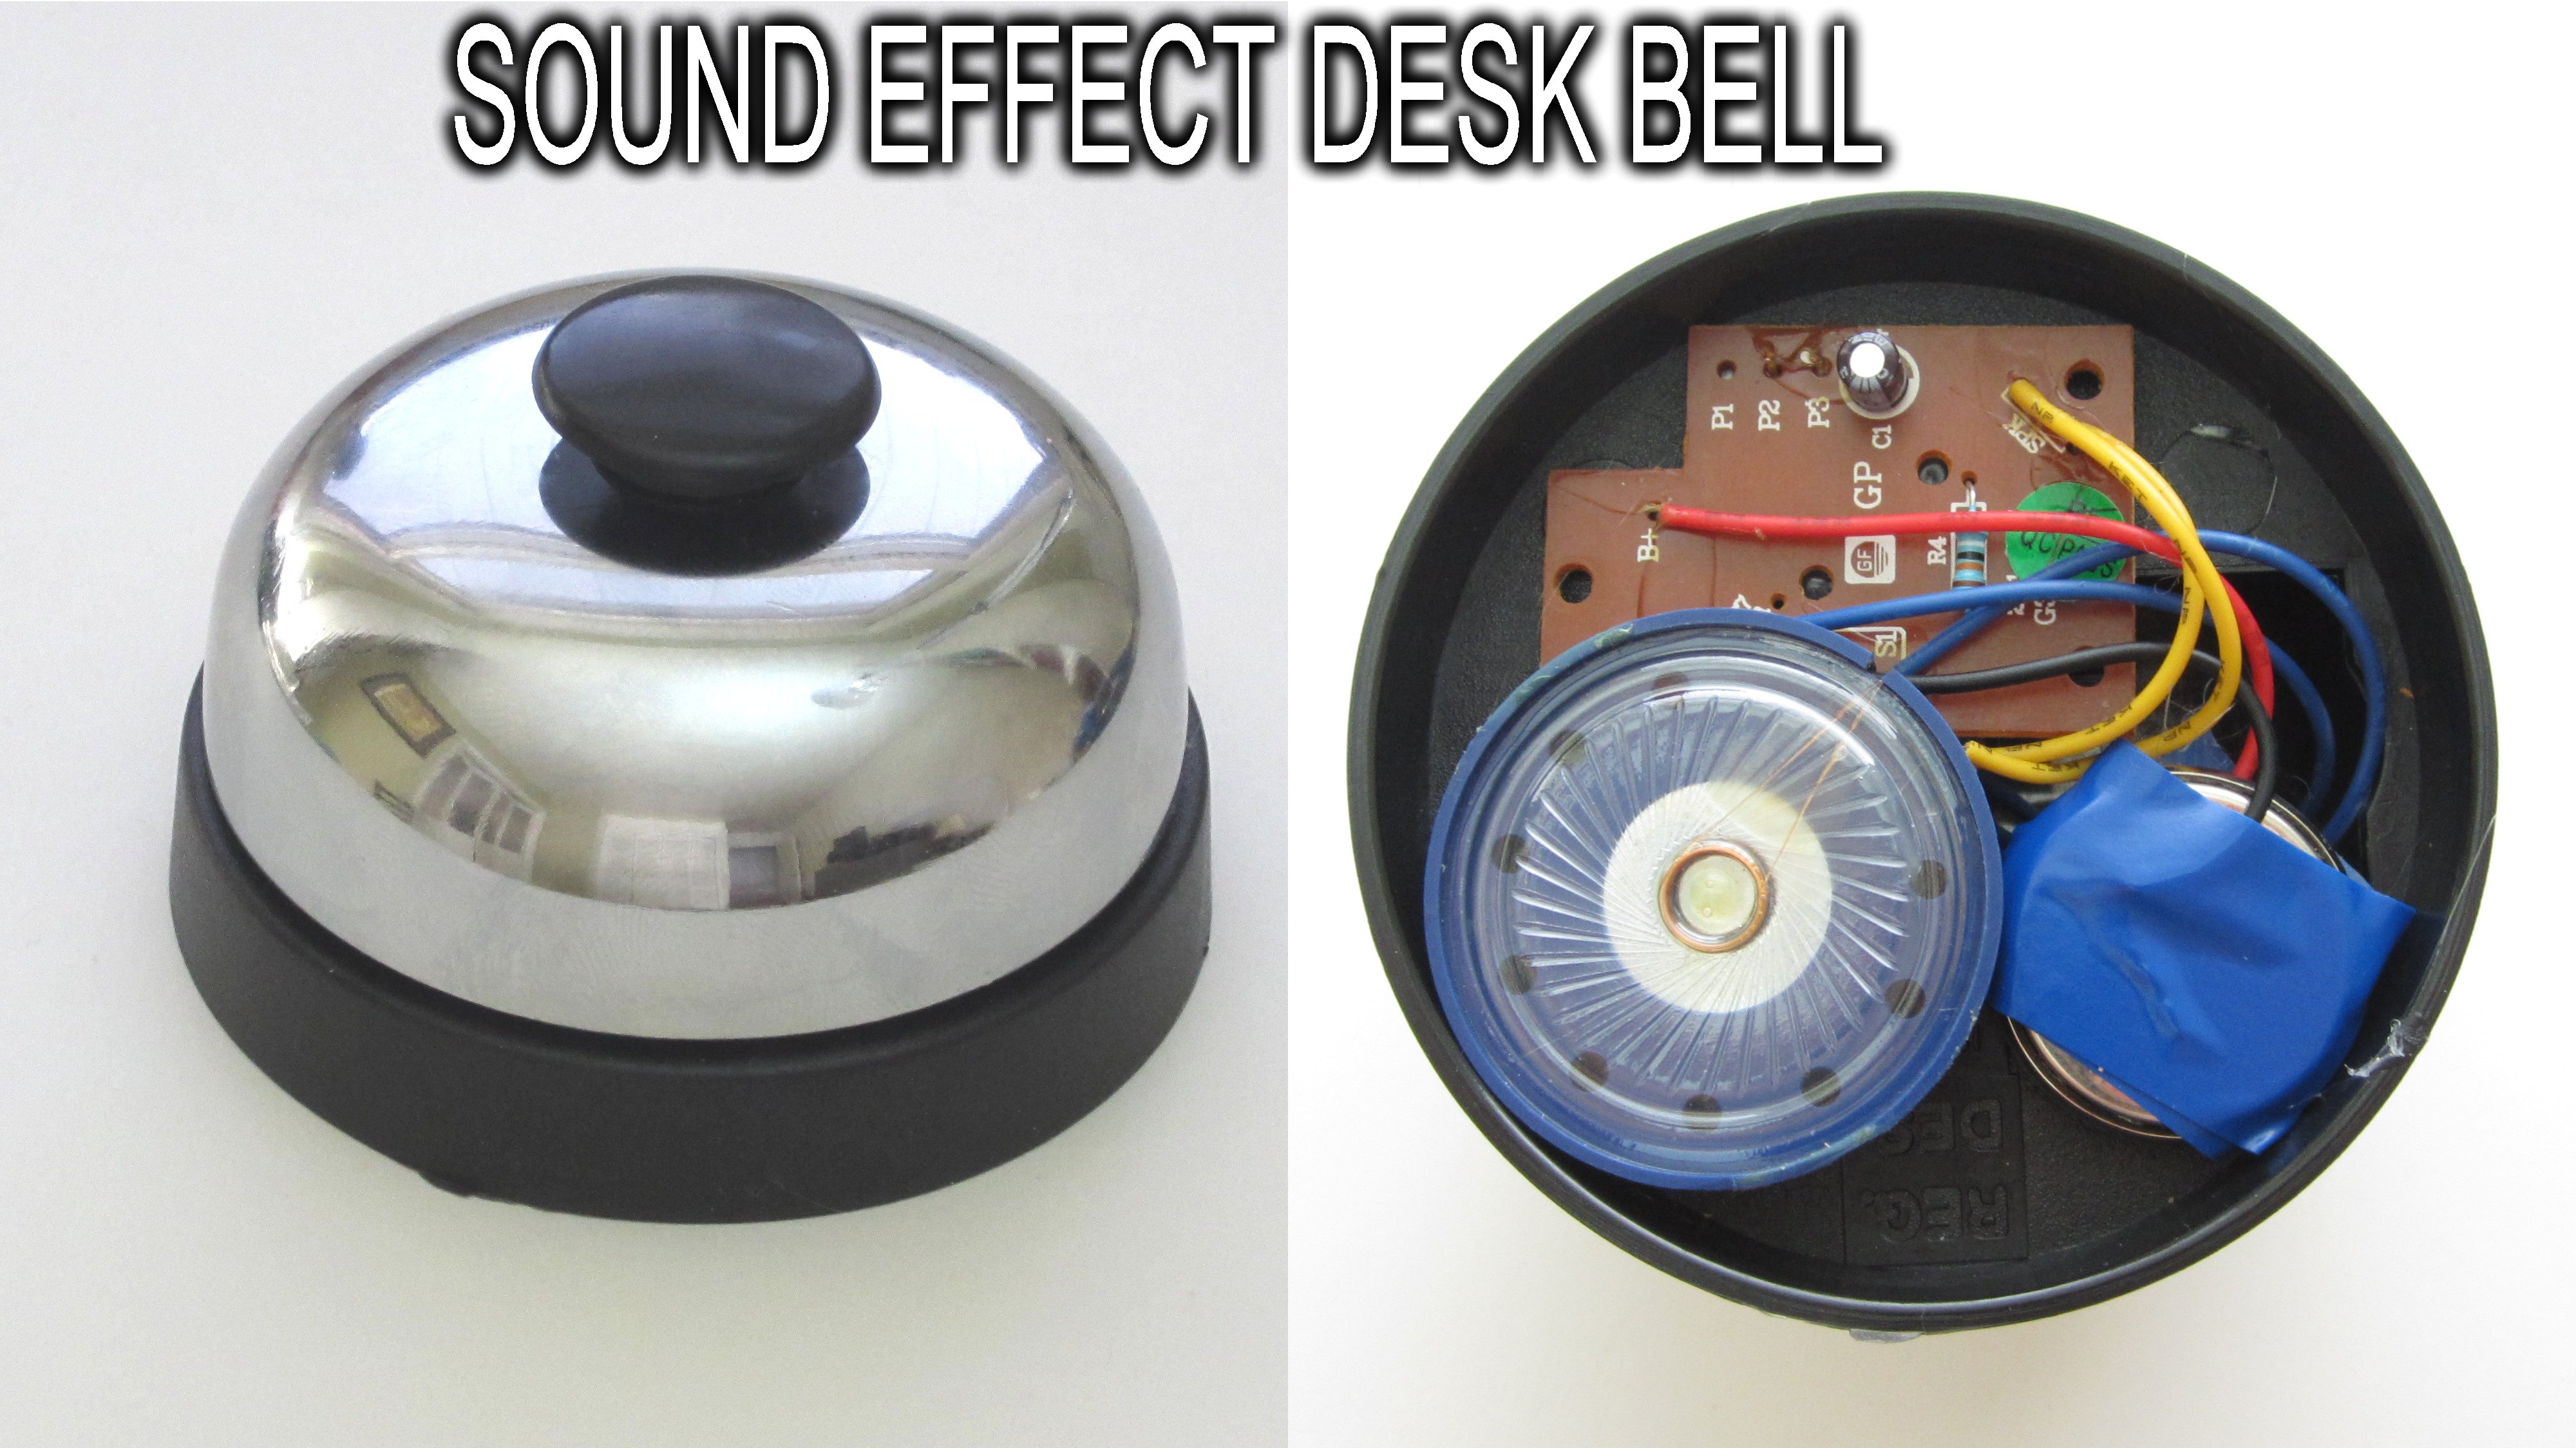 Desk Bell That Plays Sound Effect